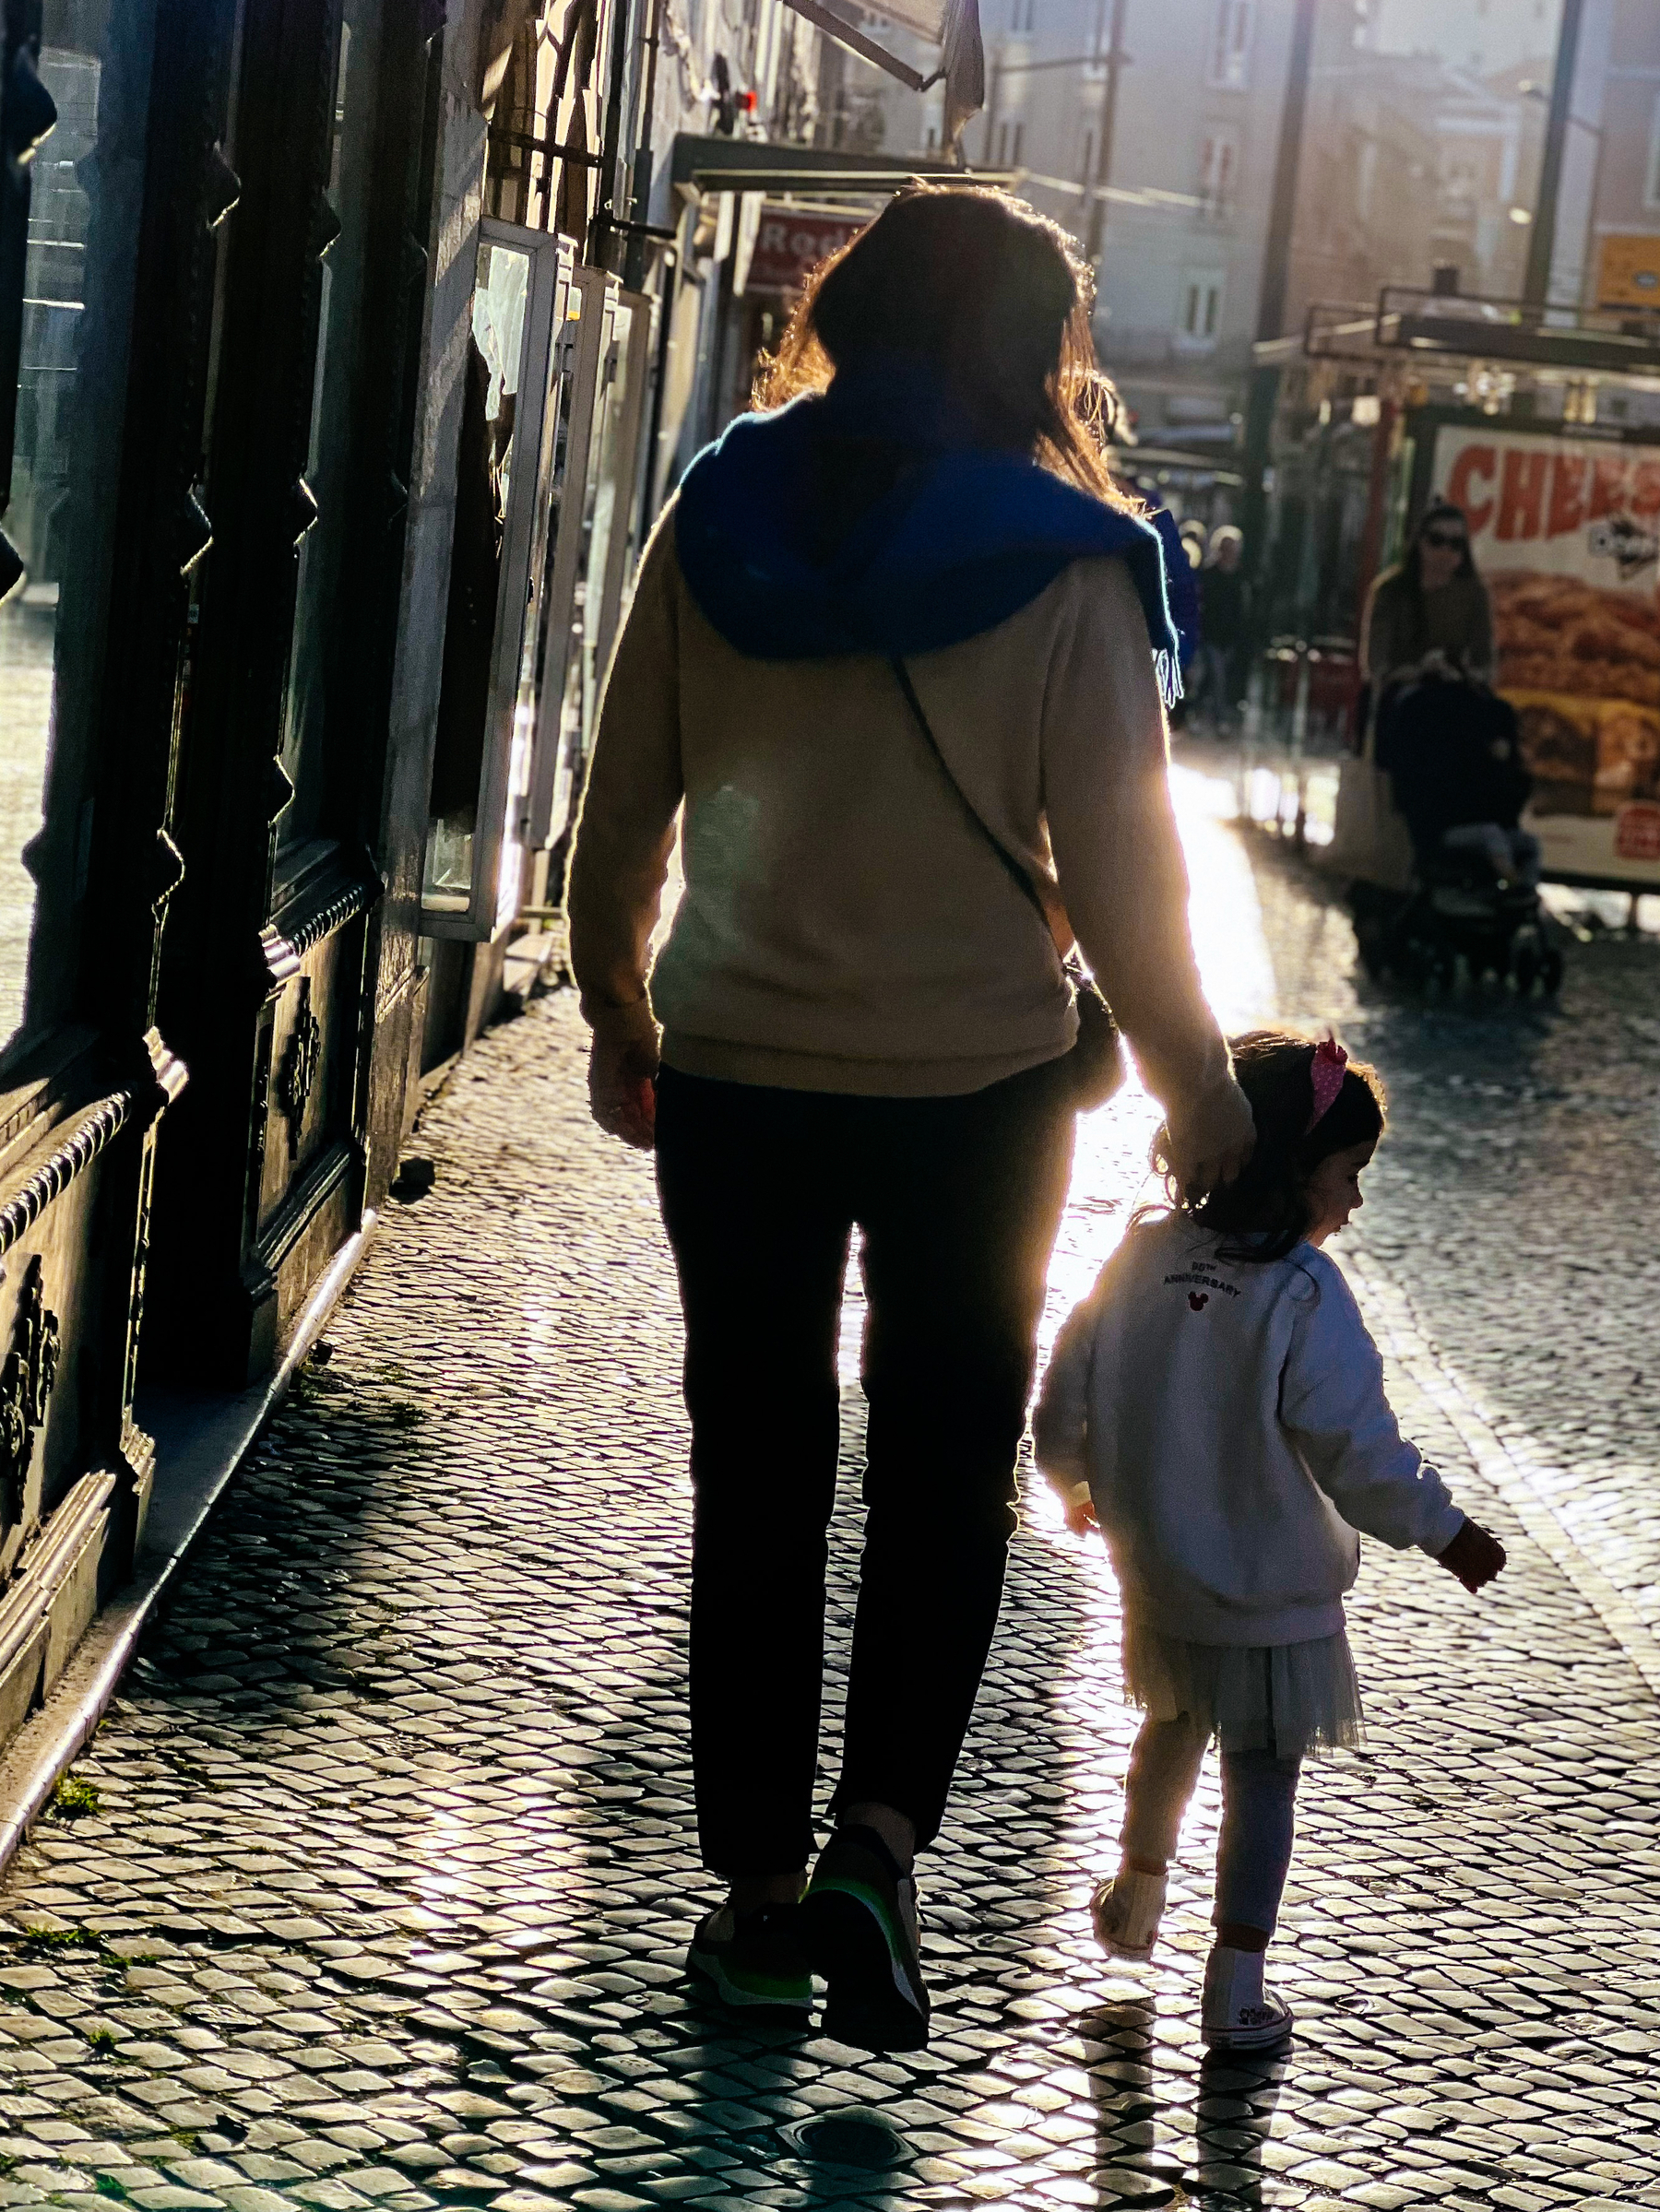 A mom and daughter couple walk down the street in a city environment, their backs to us. The girl is looking to her right, and the mom gently steers her in the right direction 